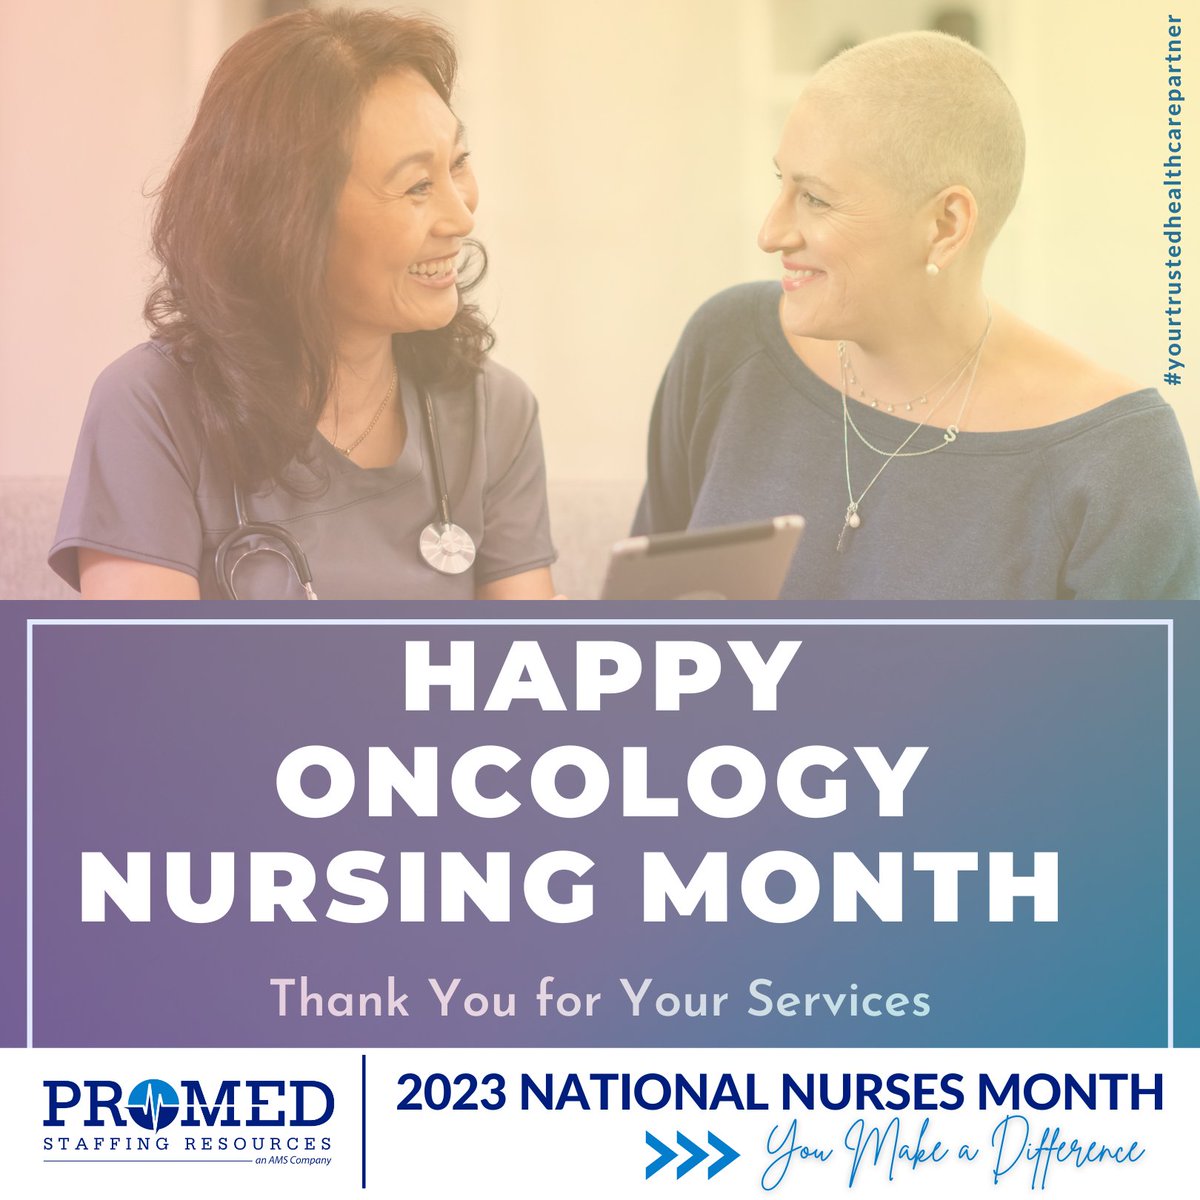 In honor of #oncologynursingmonth, we want to recognize all #oncologynurses and thank you for all that you do. Keep up the good work and Happy Oncology Nursing Month from all of us at ProMed Staffing Resources!

#cancer #oncology #chemotherapy #cancersurvivor #breastcancer #chemo